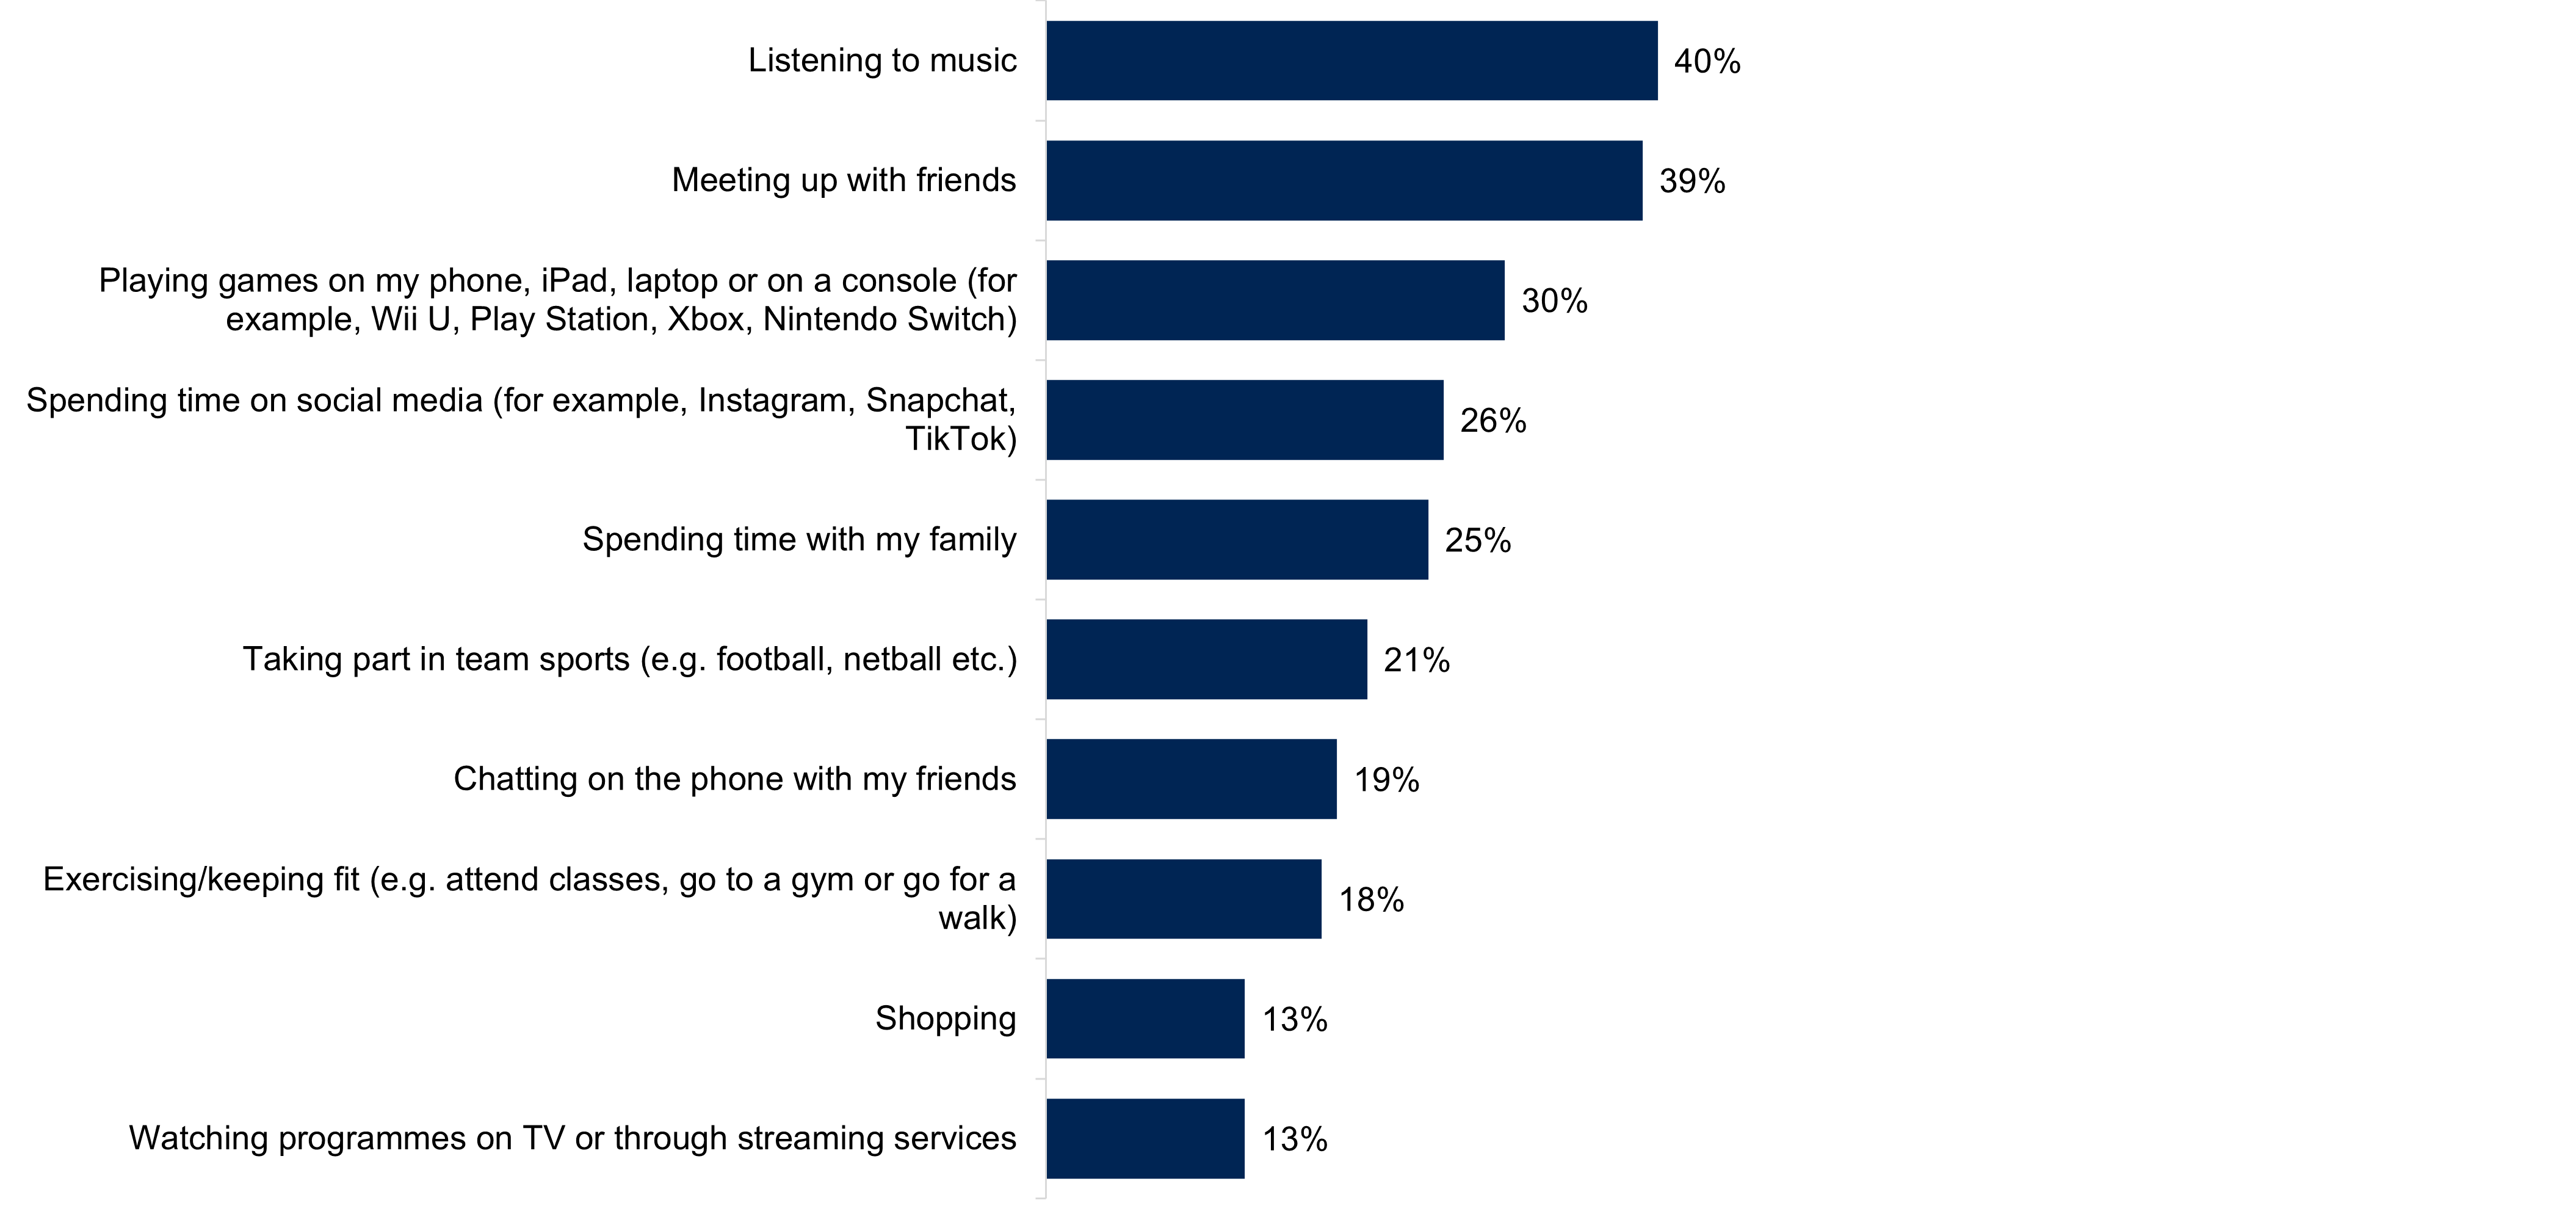  bar chart showing the top ten activities young people like to do in their spare time. Data from the chart is provided within the following table.